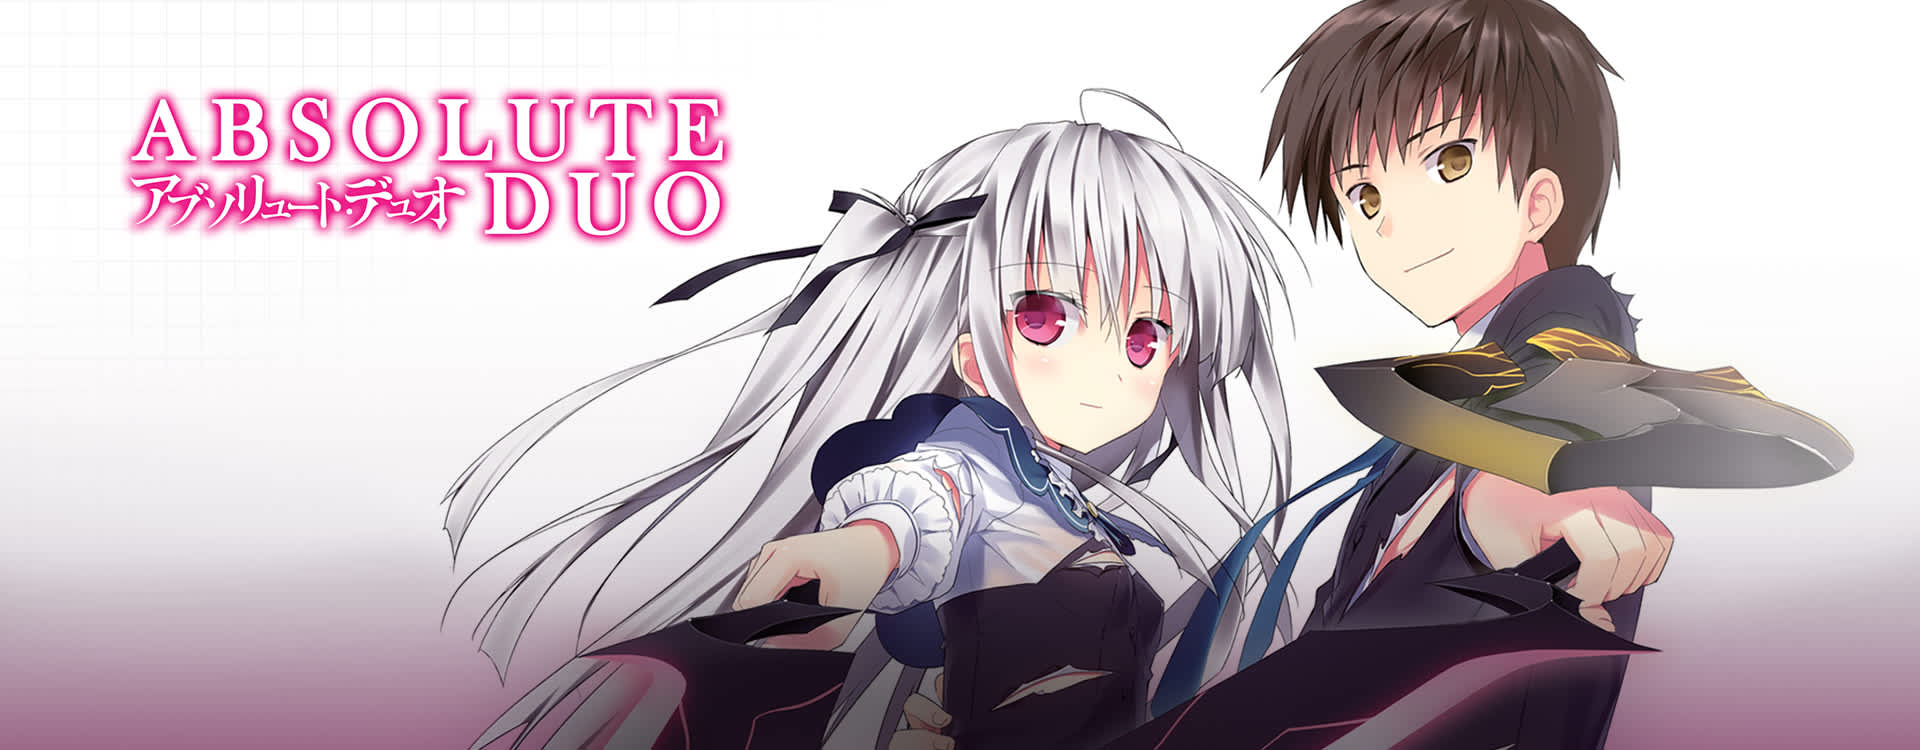 Absolute Duo Survive - Watch on Crunchyroll